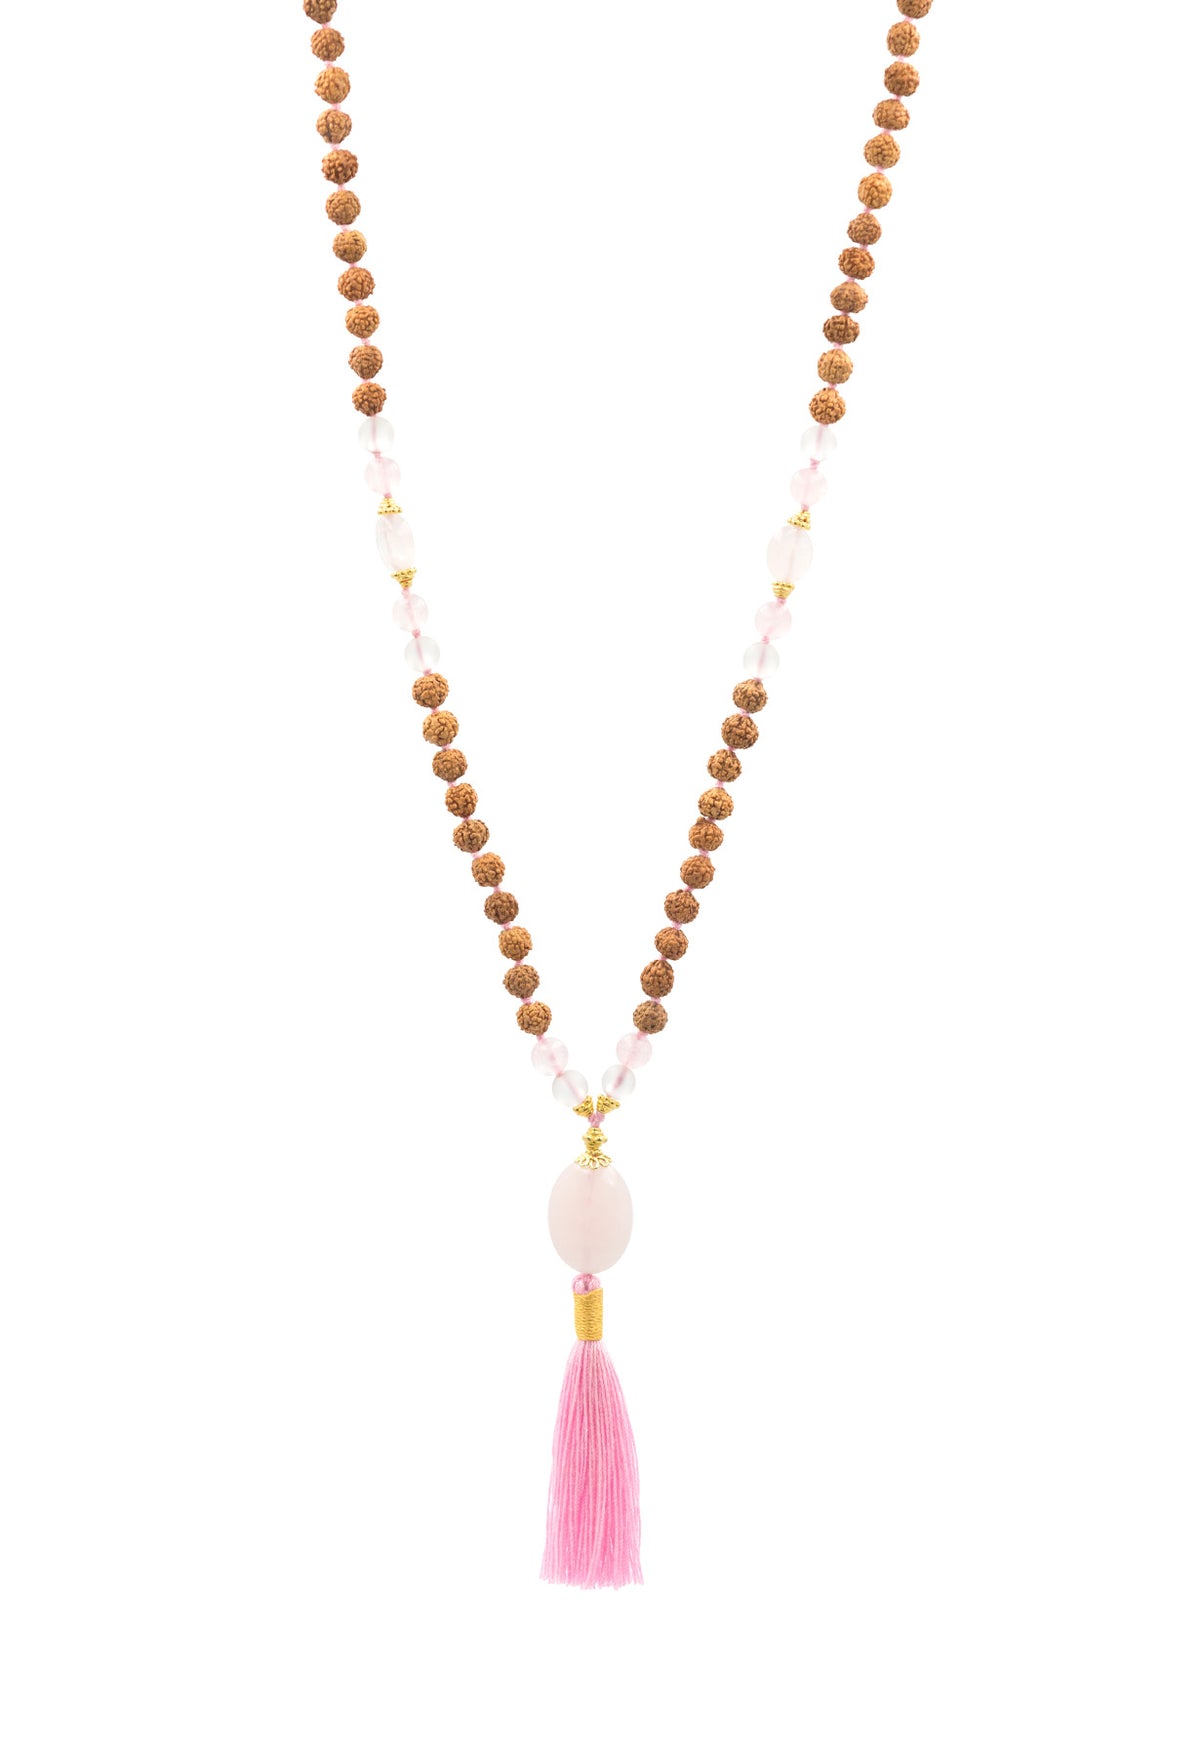 THE CROWN CHAKRA MALA FOR HER